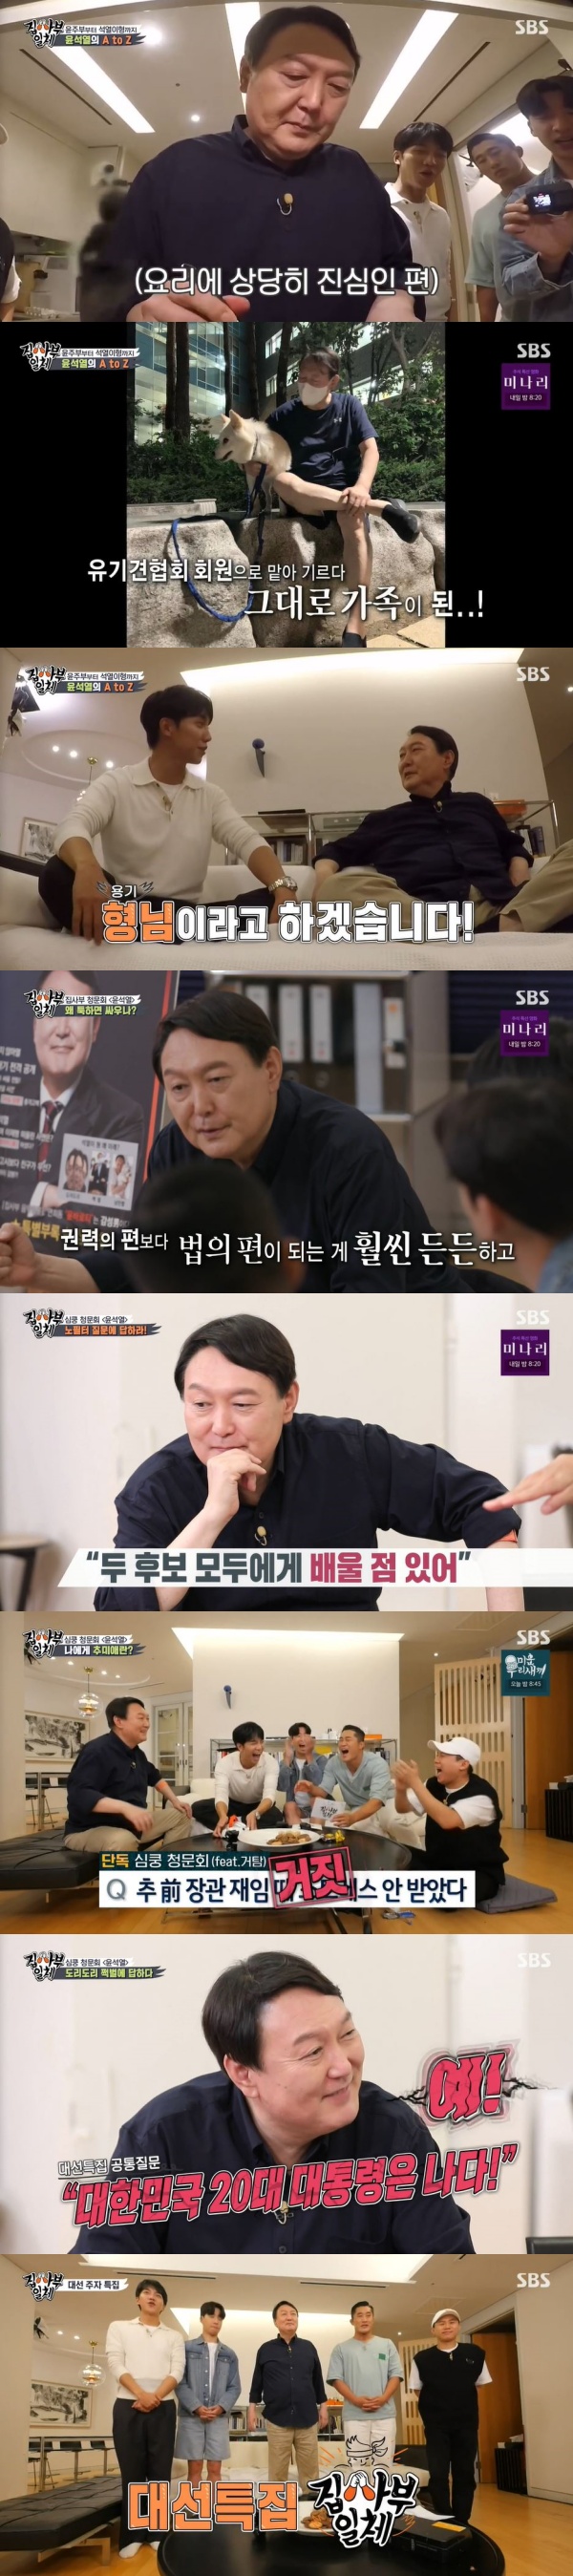 Former prosecutor general Yoon Seok-ryul, who gave the top model in the 20th presidential election, showed various aspects from human to presidential candidate.On SBS entertainment program All The Butlers, which aired on the 19th, the performance of former prosecutor general Yoon Seok-ryul, who appeared in a special feature of presidential candidates, was revealed.On this day, the members met with Yoon, the presidential candidate who turned into a master. Before the meeting, Lee Seung-gi said, He invited me directly to his house.Im too burdened, Yang said, Im not afraid, but Im going to make a mistake. Kim Dong-Hyun pointed out, Thats scary.Yang Se-hyeong laughed at the you were scared.After completing the house introduction, Yoon served the members a meal; Yang Se-hyeong asked, Do you eat often?Yoon said, I ate it often before that, he said. I do not have time to start politics and cook.My mother is good at cooking, he added, adding, I became good at cooking while applying and applying Actor over my shoulder.Yoon expressed his affection for his dog. Tori was an abandoned dog, he said. We tried to adopt it if we showed up for a temporary appointment, but we became our family.Yang Se-hyeong was lucky that the dogs are pussy.Yoon said, The children know that I am coming on Friday and do not eat food. Puppies inhale storms when they make special meals for dogs.Yoon presented a mock-up of Joo Hyun vocals; Lee Seung-gi, who saw it, was fortunate to say, About former President Yoon Seok-ryul.Yoon said, Seok-yeol is my brother. He said, I have been quitting the president for a long time.Lee Seung-gi declared, I will be my brother after seeing the mock-up of Mr. Joo Hyuns vocal cords. Yoon replied, I have four brothers.Lee Seung-gi, who focuses on cooking, said, It is a restaurant, and I am surprised that the passion for food is about the type of food.Yoon said, My father said, If you quit the test, do not open a lawyer but a restaurant.Lee Seung-gi asked, There is a saying that it is Friend over the judicial notice. Yoon was fortunate that there was a second test from Tuesday.Friend made a proposal, but he refused because of the judicial notice, he said. I did not study, so I went to Daegu with only one book of criminal proceedings.After that, I took a criminal procedure test and I saw it on a high-speed bus. I passed it by writing a memorizing picture.Lee Seung-gi asked, Did you quit as president for the presidential top model?Yoon said, I have been retired since I retired. I had to finish my term, but sitting there was humiliation. I was forced to leave.Yang Se-hyeong, who heard this, said, I think it will be no jam as soon as the food is finished.Yoon said, I think about the time I left, so my face gets hardened.Yoon said, We were able to buy part of the company for 10 years, he said. These days it has become too difficult to get a house.If a young person does not have hope, the society is dead, he said. When I do a new job, I tend to be a little scared.I am confident that I can push it in the direction I think without giving up, although there are many things that are lacking. Lee Seung-gi was fortunate to proceed the All The Butlers hearing; Yoon responded, Its my major to get a hearing.In his statement, I am not loyal to people, Yoon said, I told my juniors, The prosecutor should not be loyal to people. He said, People are personnel.We must be loyal to the nation and the people, he said.Lee Seung-gi said, The opponent is important, he said. The chicken is all with the president. Yang Se-hyeong added, Do you want to fight if you see the president?Yoon said, I do not do Top Model to the president, but I have handled the case in accordance with the law. There is no reason to fight Top Model in the president.If the law of the power is not properly handled, the people can not be told to keep the law, and society is in confusion. Therefore, it is important to investigate the power in principle. Lee Seung-gi asked, There are concerns about political experience.Yoon said, I did not back down even if I had difficulty. I was obsessed with the principle and helped me study new fields.I lived in a fierce manner, he said. I am confident that I will succeed in any new thing. I am confident in work.Yoon participated in the heart rate hearing; the members asked about what to learn from Democratic Party Governor Lee Jae-myung and former party leader Lee Nak-yeon.Yoon replied, I want to take away the meticulousness of Lee Nak-yeon, the chan of Lee Jae-myung. Lee Seung-gi added, If you are a kan, you are not tough.Yoon said, I will do more reinforcement.Lee Seung-gi said, I am a child, and asked, Did you not feel stressed? Yoon said, What would be stressful?Yoo Su-bin suggested, I think I should use a lie detector. Yoon said that he was not stressed because of former Justice Minister Chu Mi-ae.But the lie detector was false. Yoon said, The machine is very good.Yoon said, I will not be a president when I become president.It is important to communicate with people at meals, he said. I will communicate with people who need encouragement, such as opposition parties, journalists, and people who need encouragement.Yoon said, I want to say, I am sorry for young people as an older generation in Korea.I am sorry that the young people do not have hope in the future, he said. I still want to say, Do not lose your courage.Yoon said, Entertainment is the first time, but it seems to have become a big study of life. Yoon Seok-ryul before and after shooting would have changed.Meanwhile, All The Butlers is a life tutoring entertainment program with youths full of question marks and myway geek masters.Yoon will be on the 26th, Lee Jae-myung will be on the 26th, Lee Nak-yeon will be on the side of the Democratic Party.Photo SBS broadcast screen capture